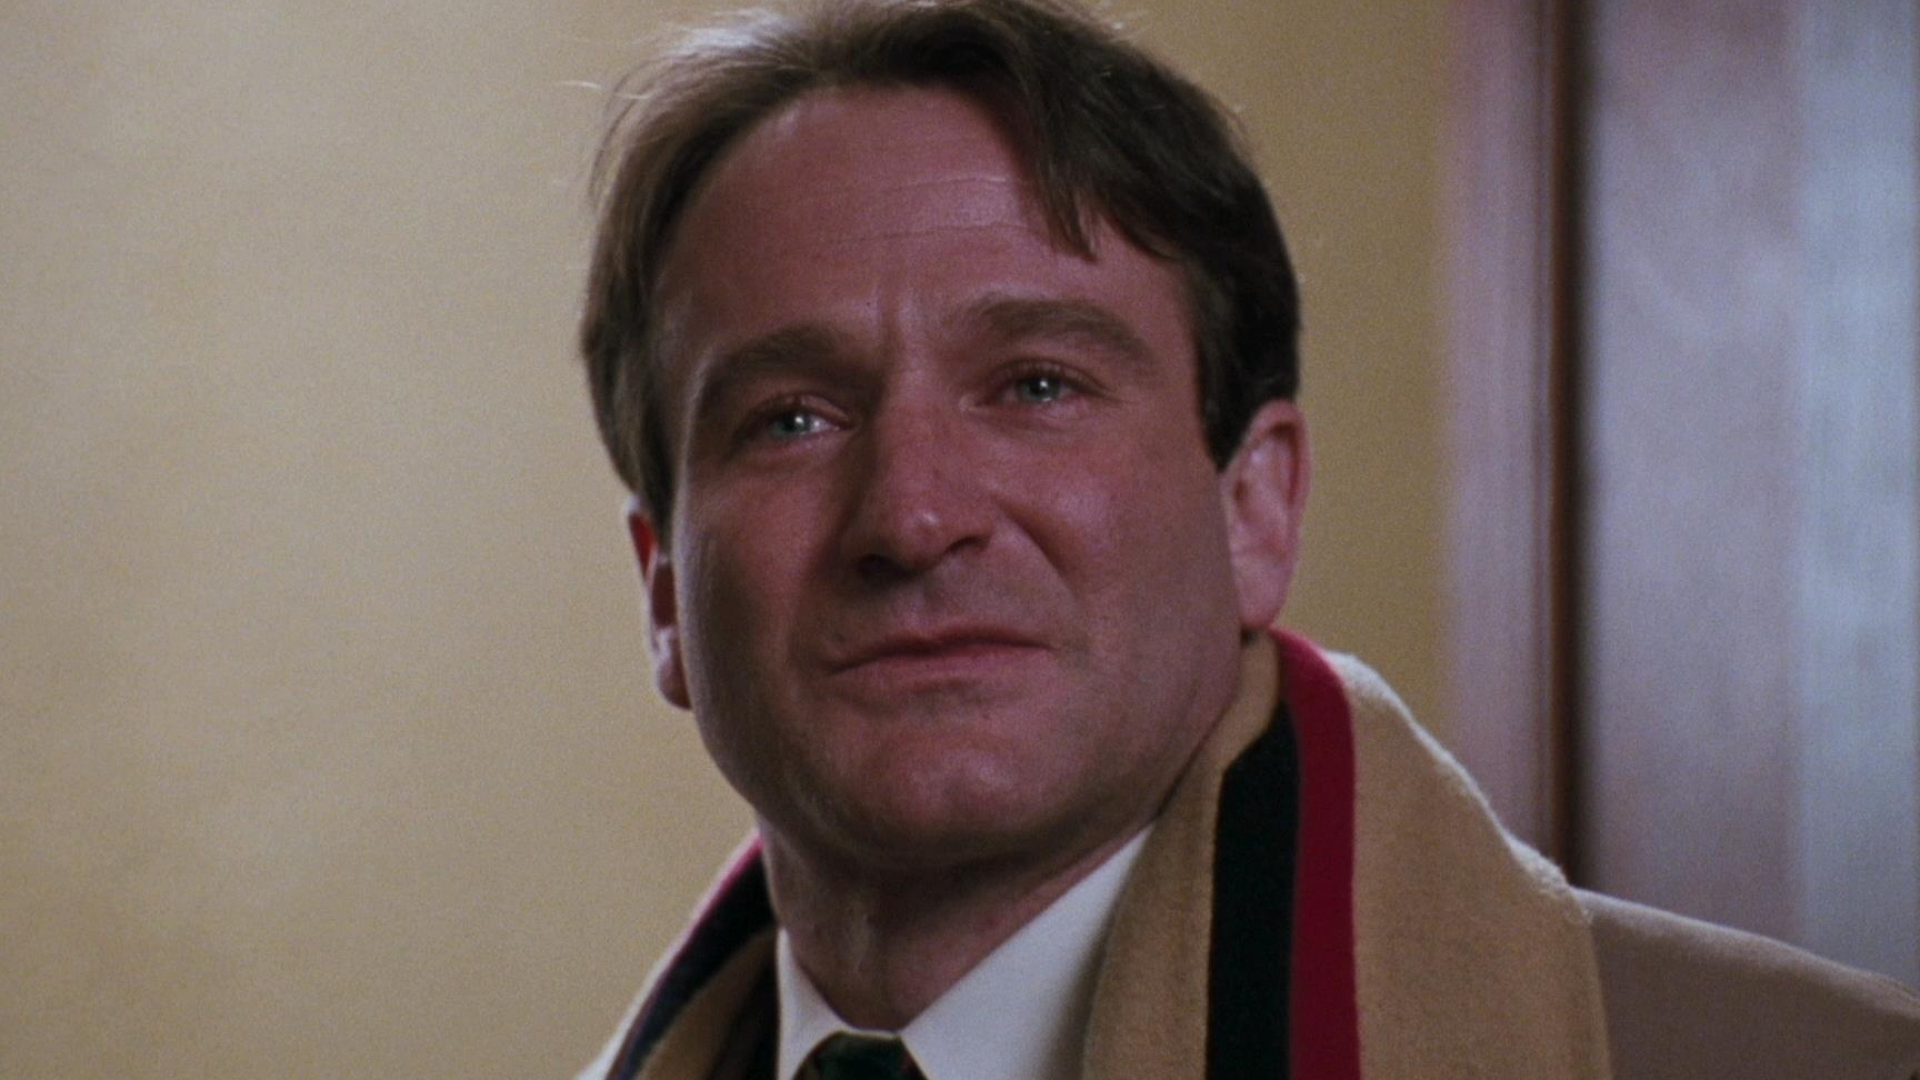 Dead Poets Society: Filmed at St. Andrews, a private boarding school in Delaware. 1920x1080 Full HD Background.